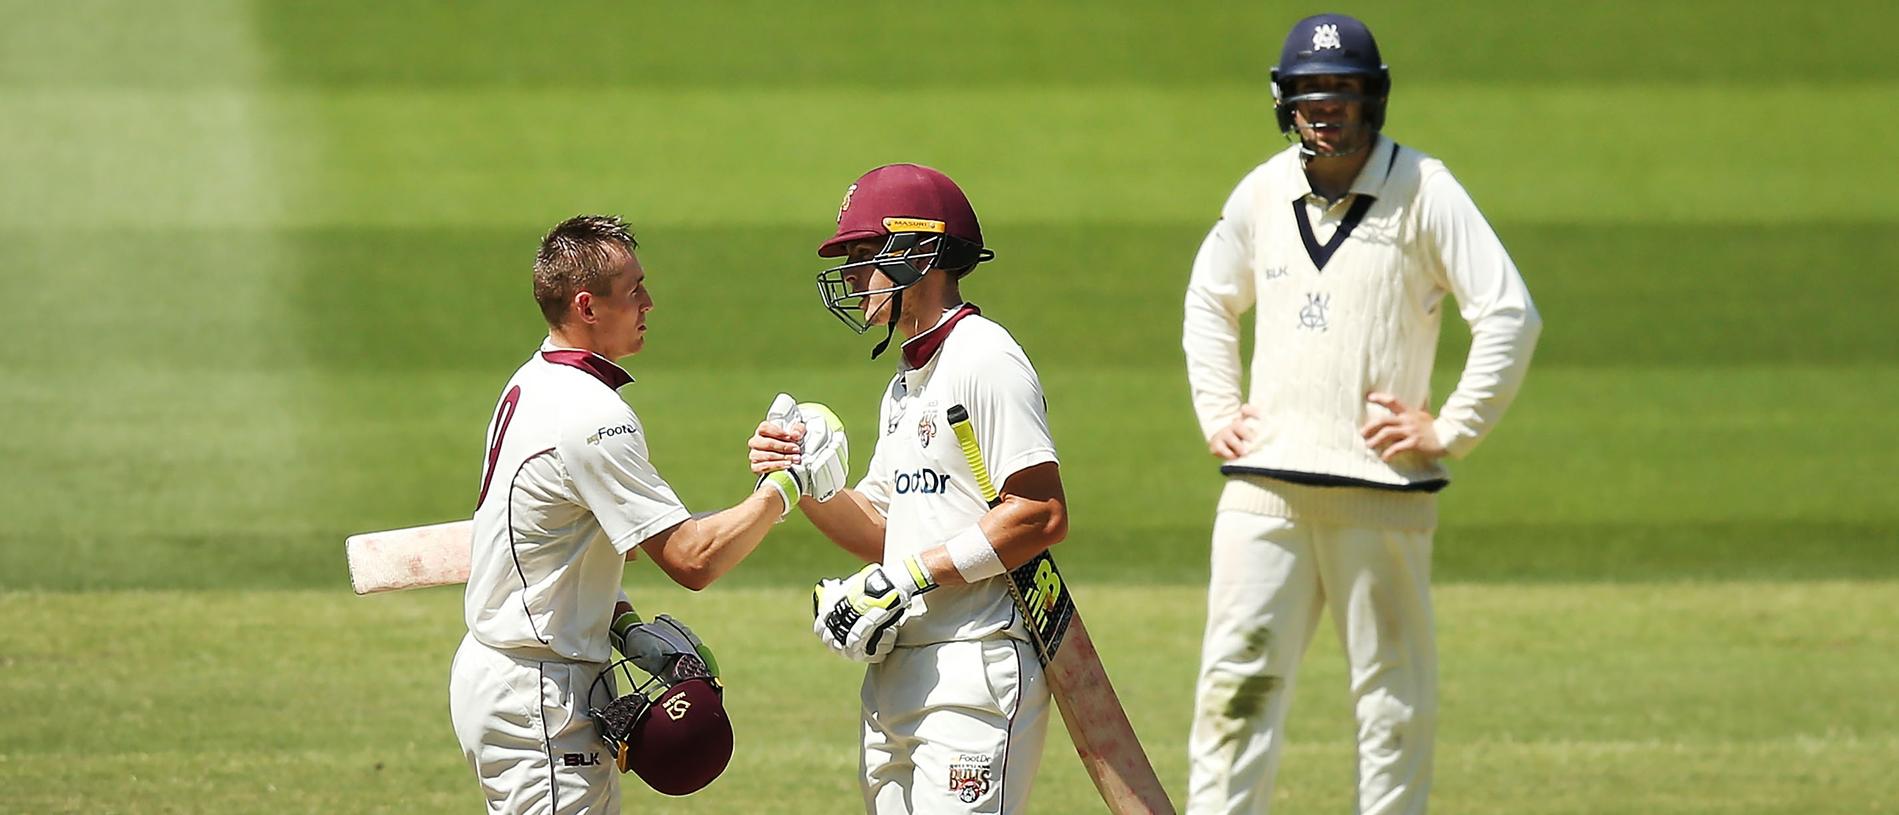 The MCG saw its fifth-straight first-class draw this week.